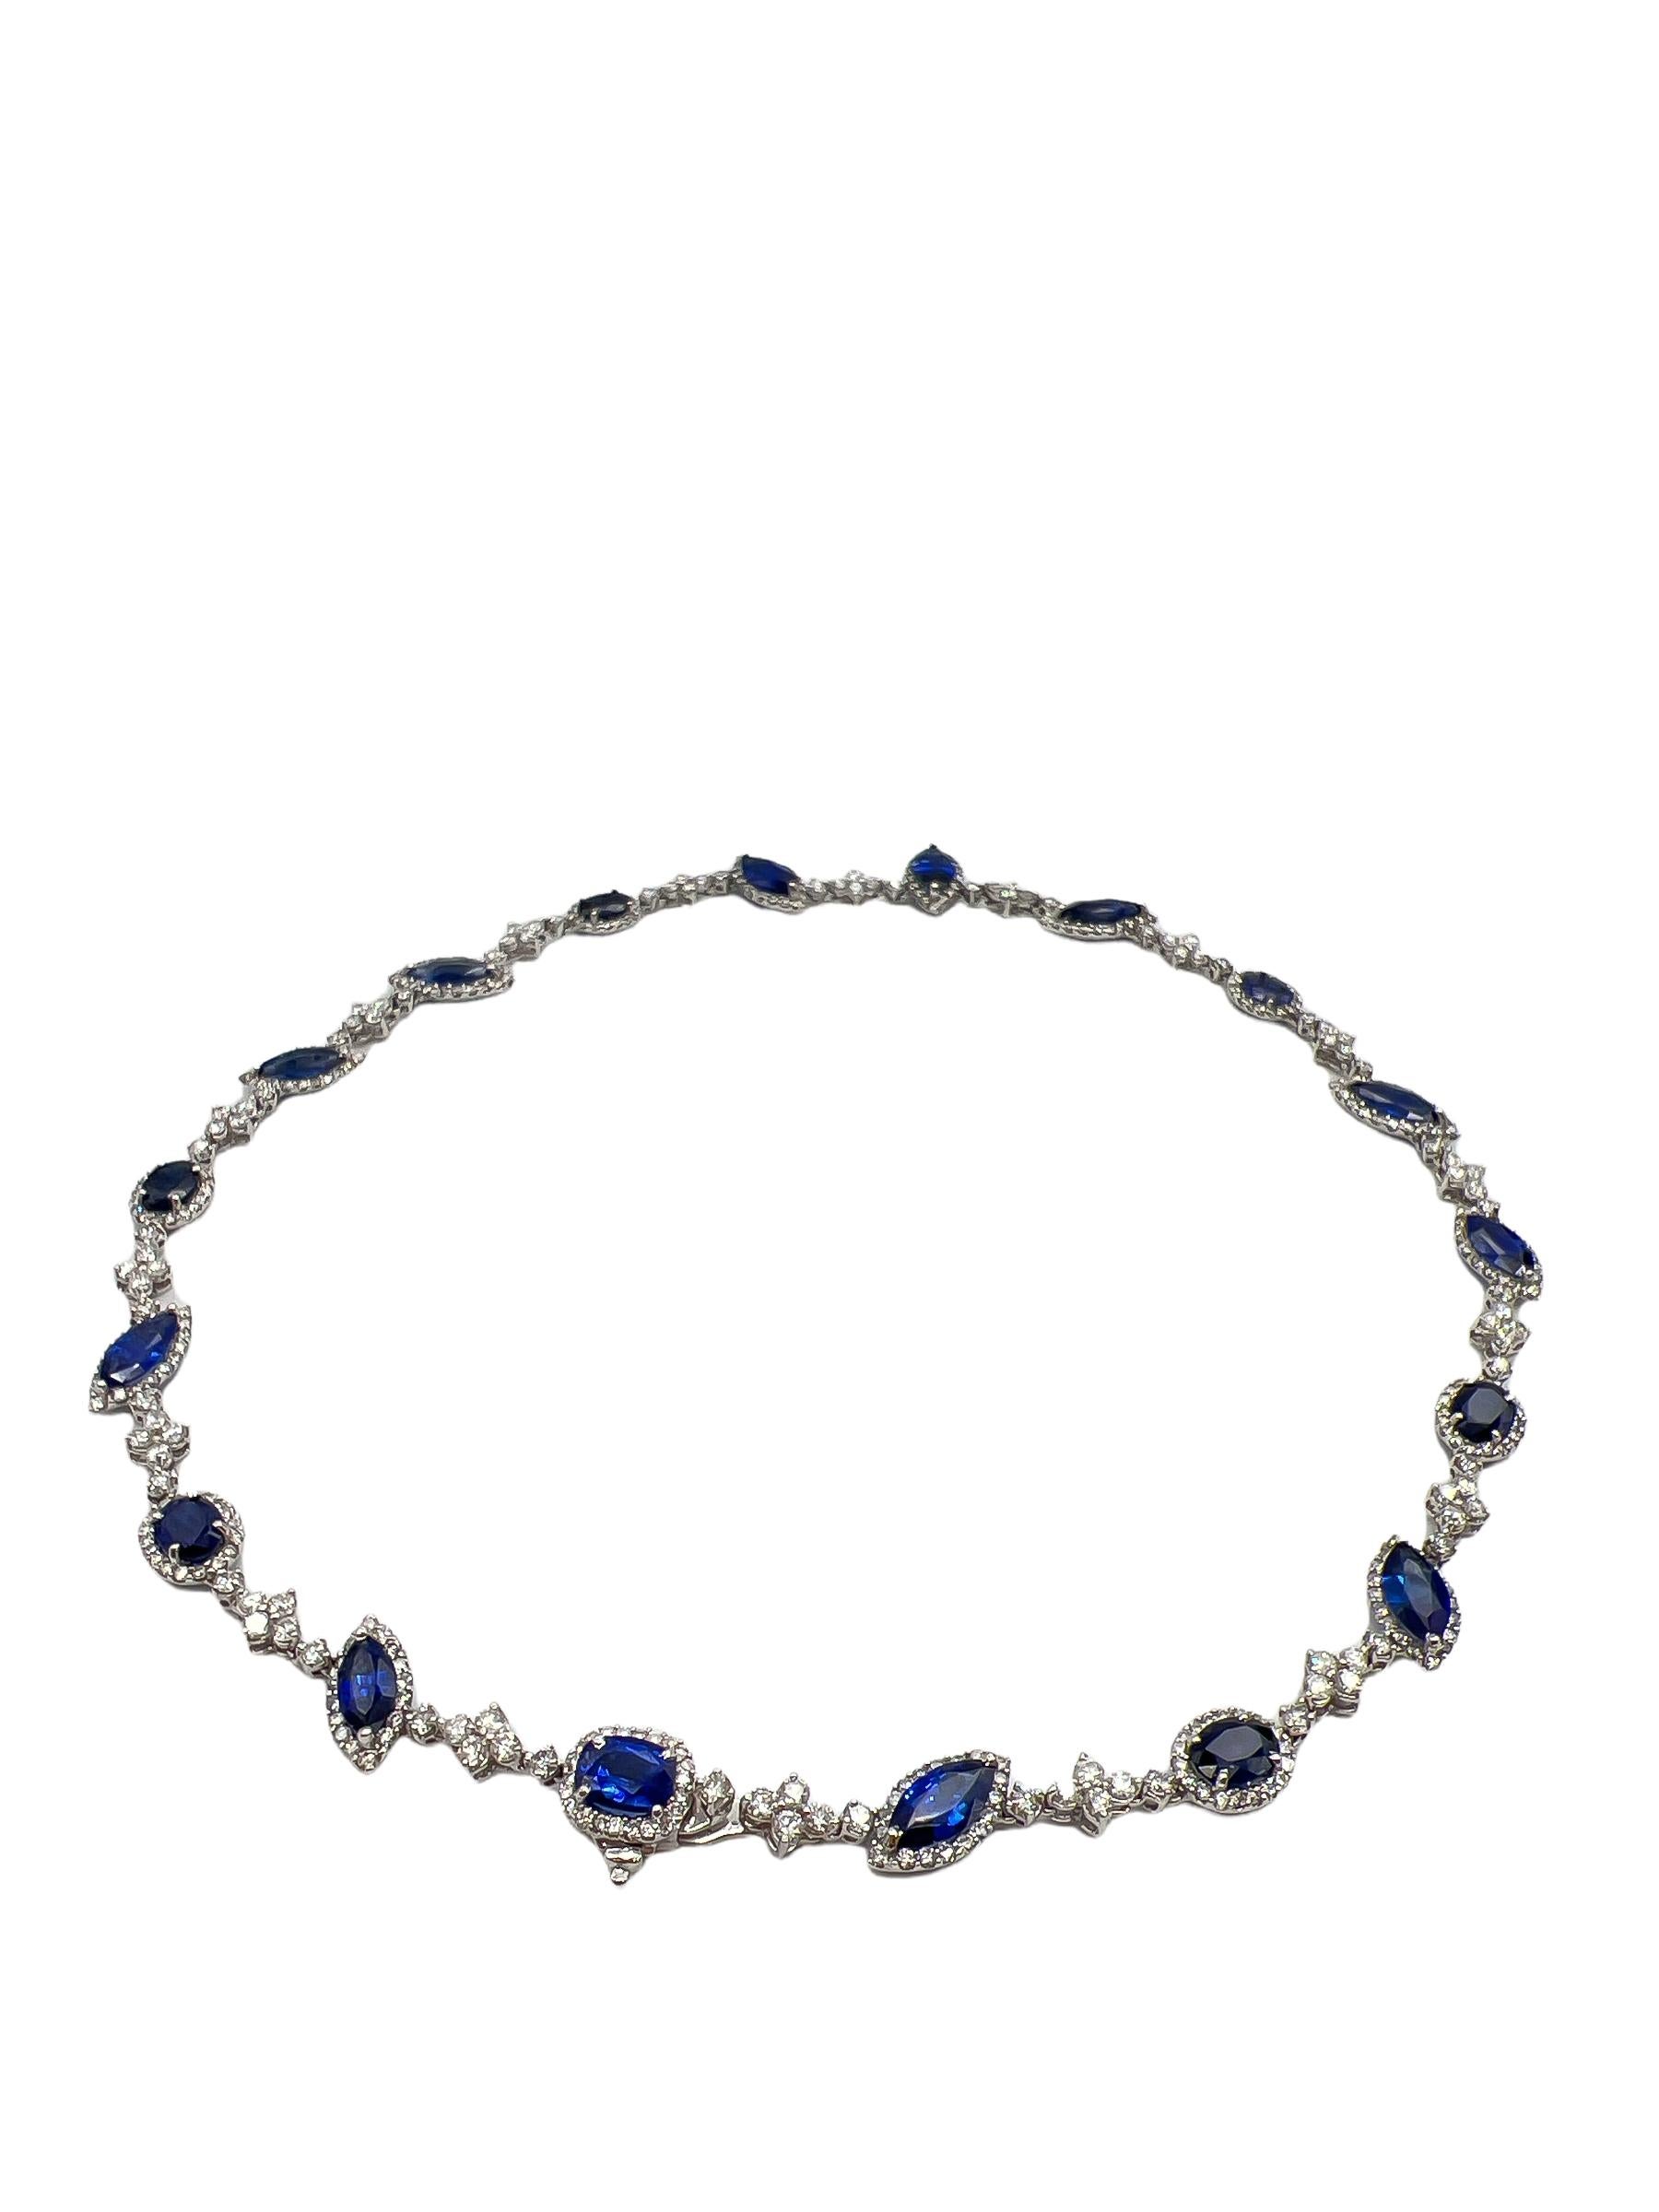 Women's or Men's 28.30 Total Carat Fancy Sapphire and Diamond, White Gold Necklace For Sale